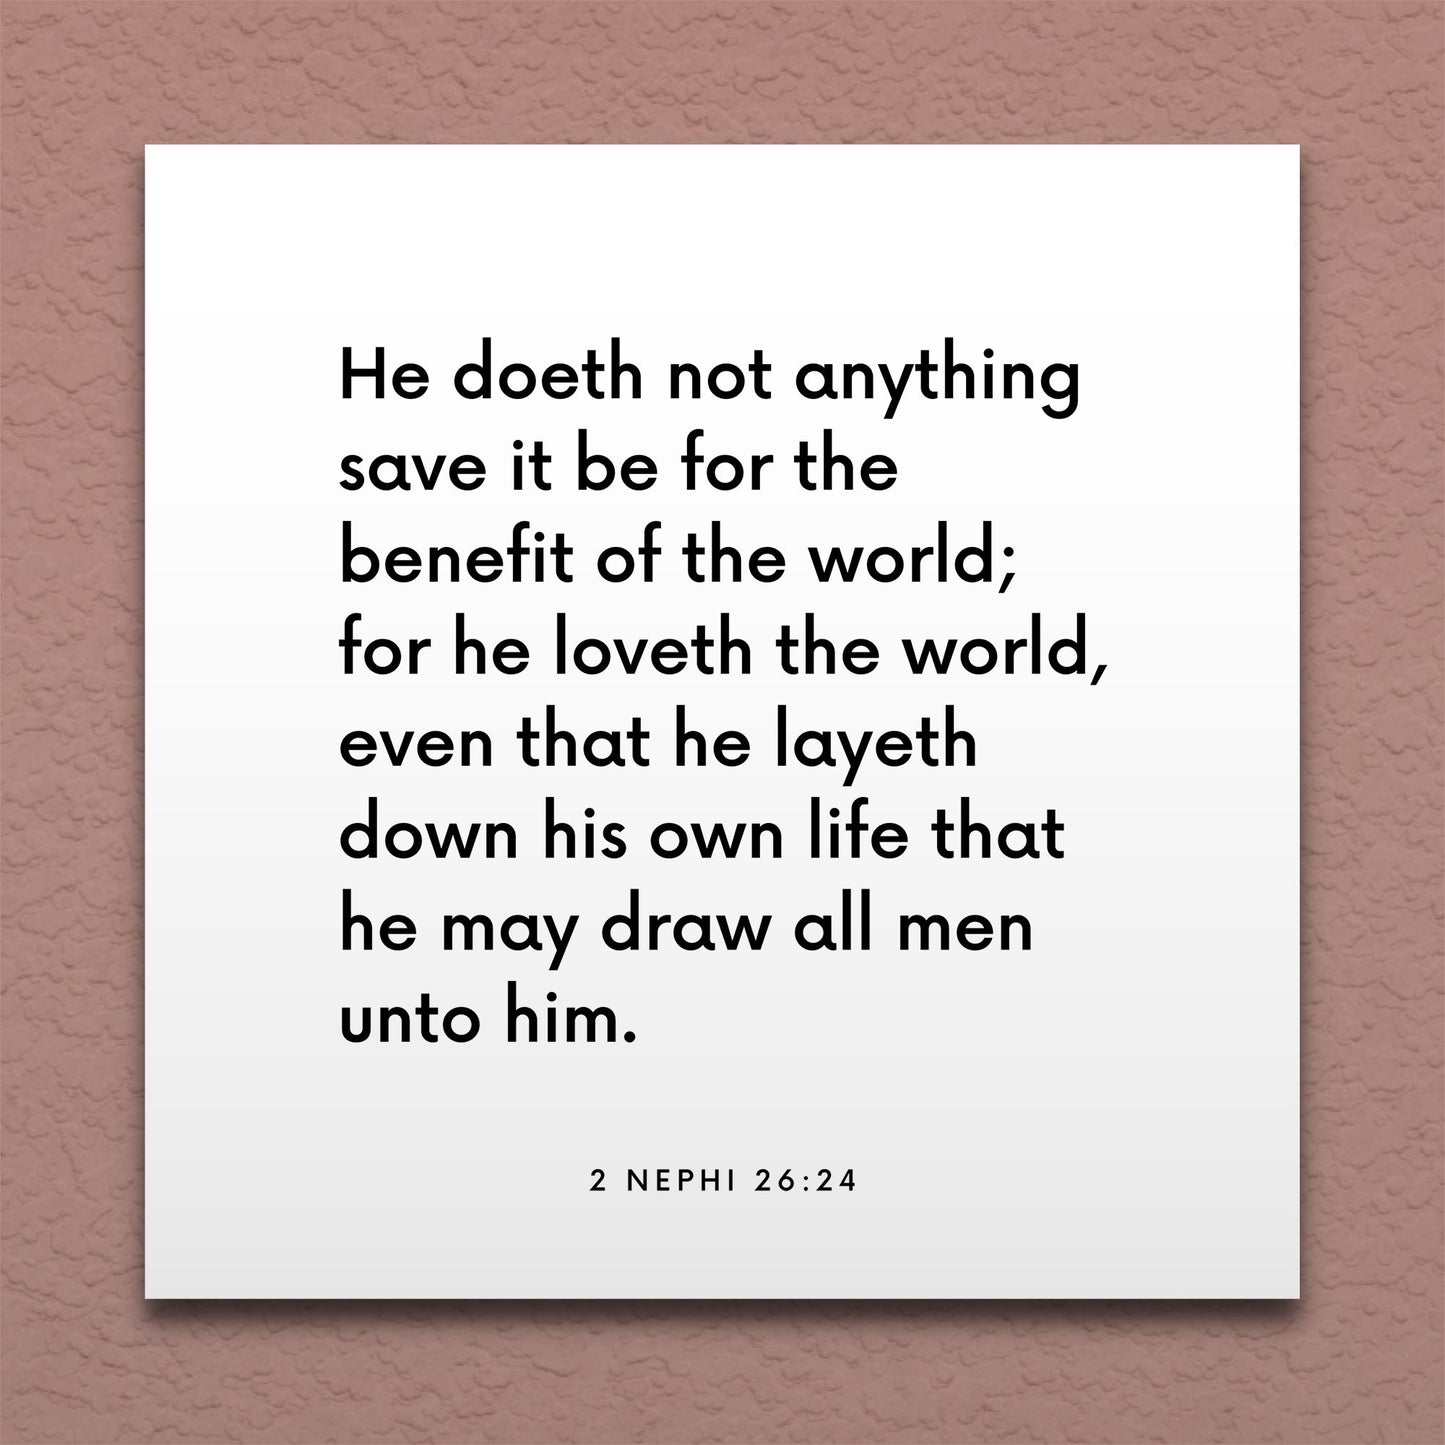 Wall-mounted scripture tile for 2 Nephi 26:24 - "He loveth the world, even that he layeth down his own life"